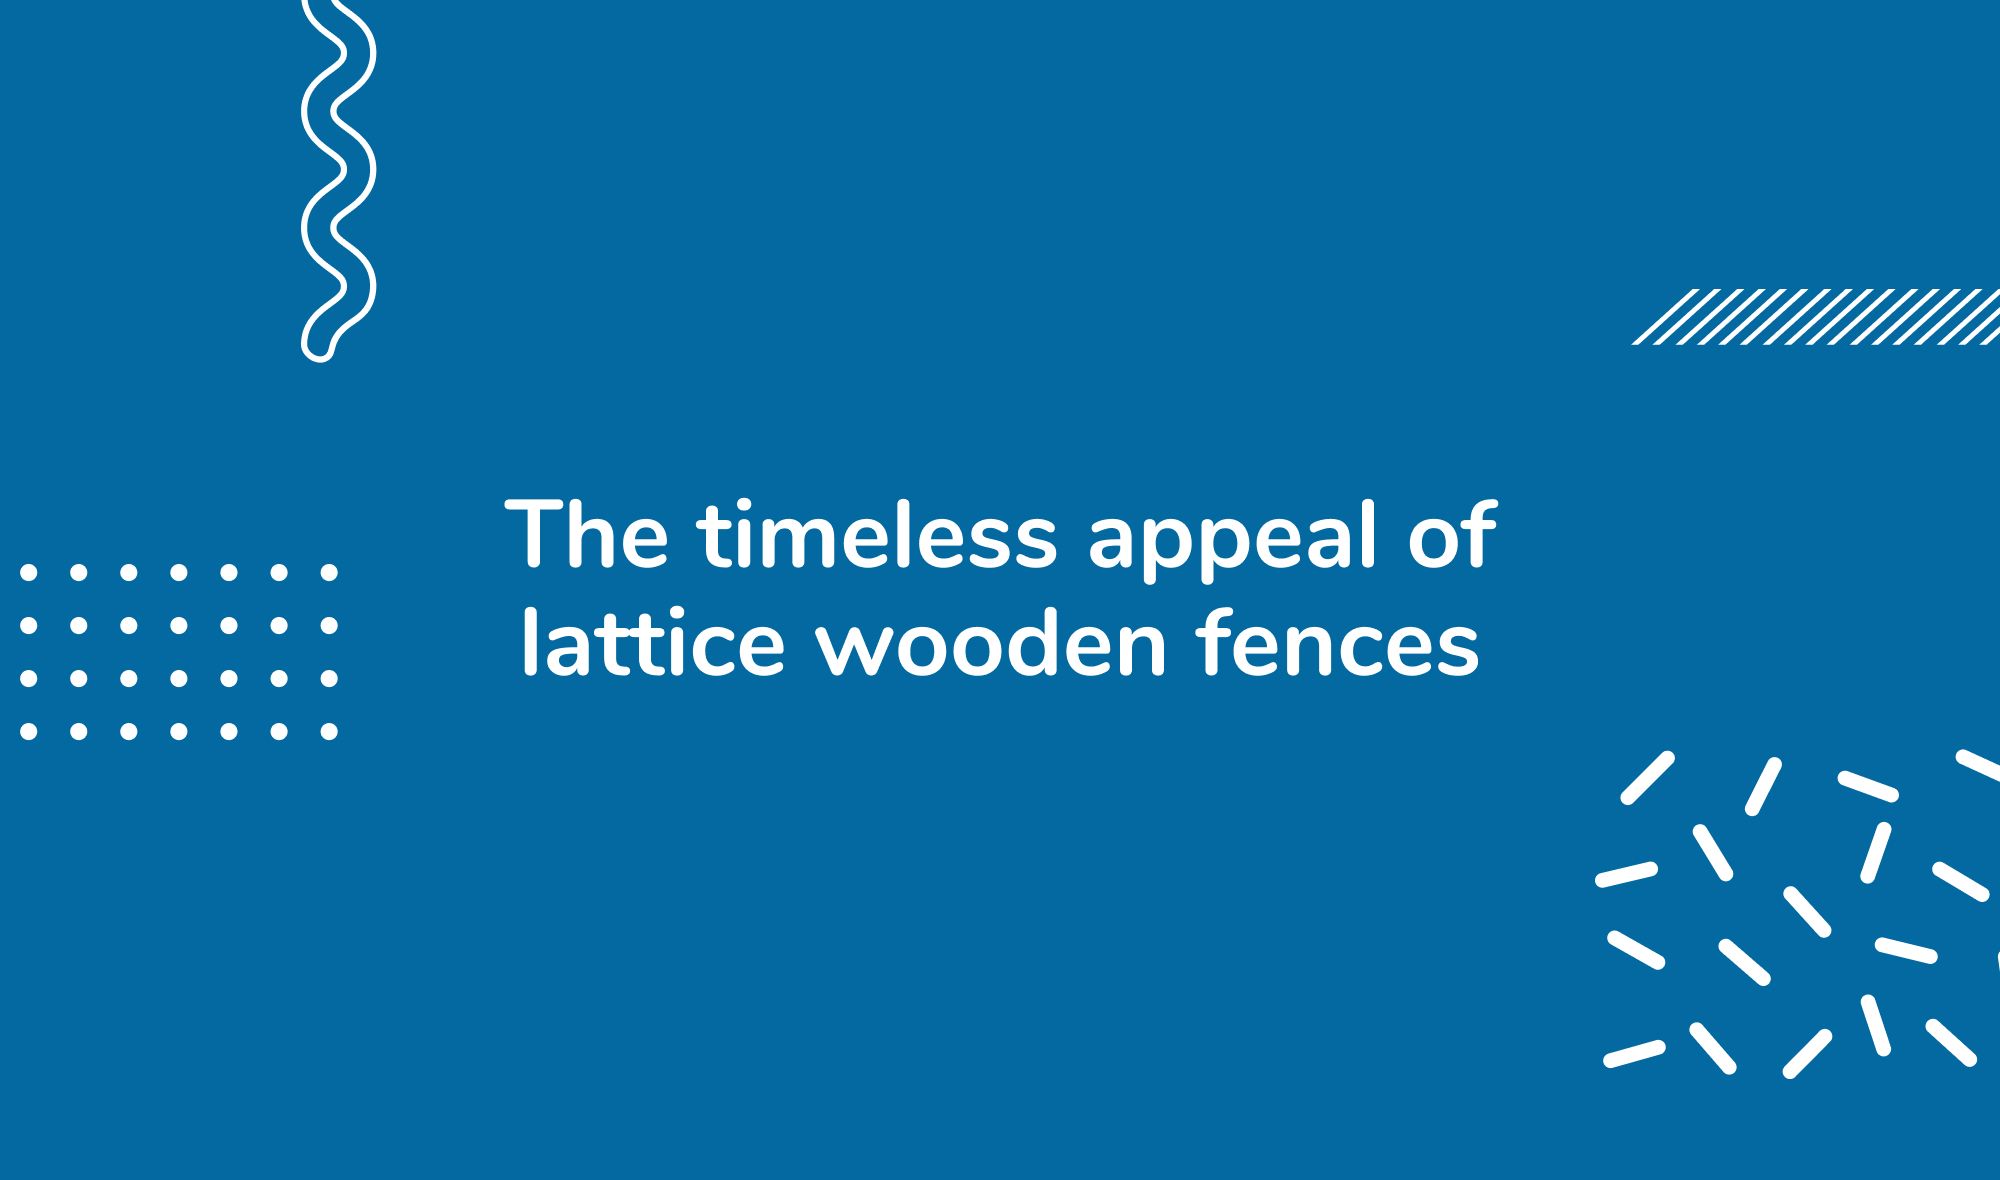 The timeless appeal of lattice wooden fences